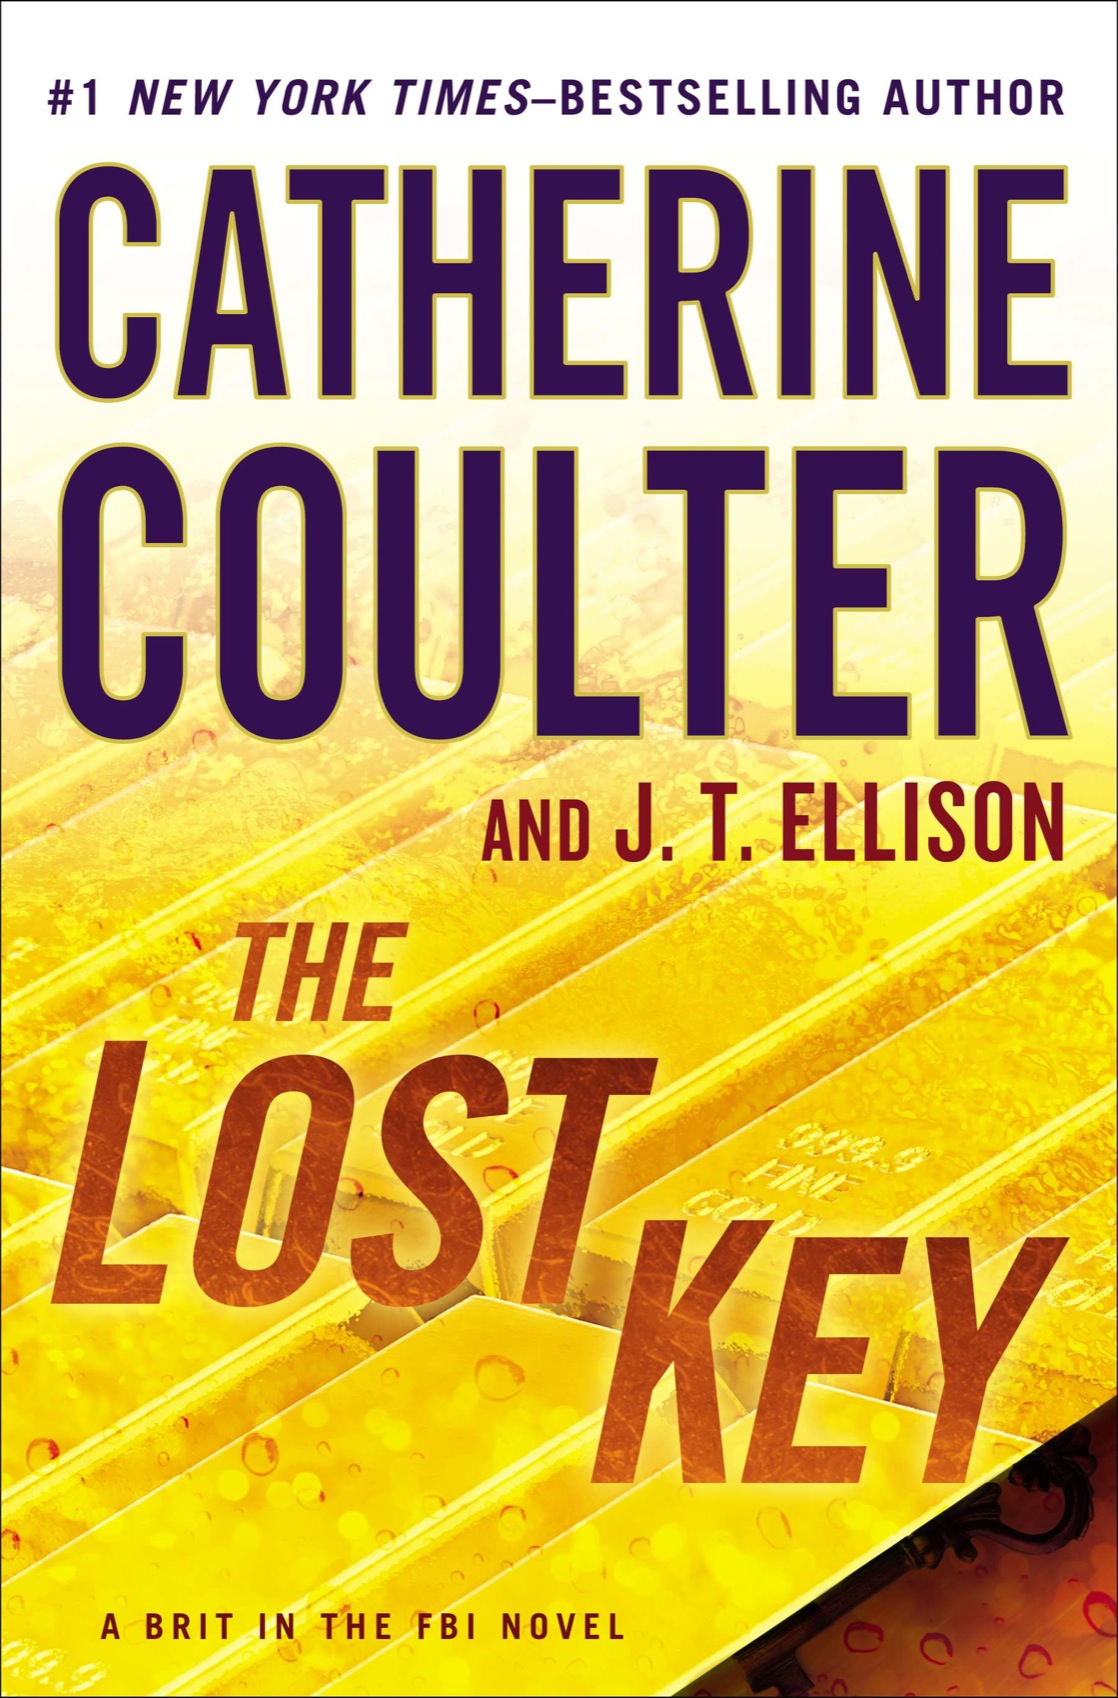 The Lost Key (2014) by Catherine Coulter